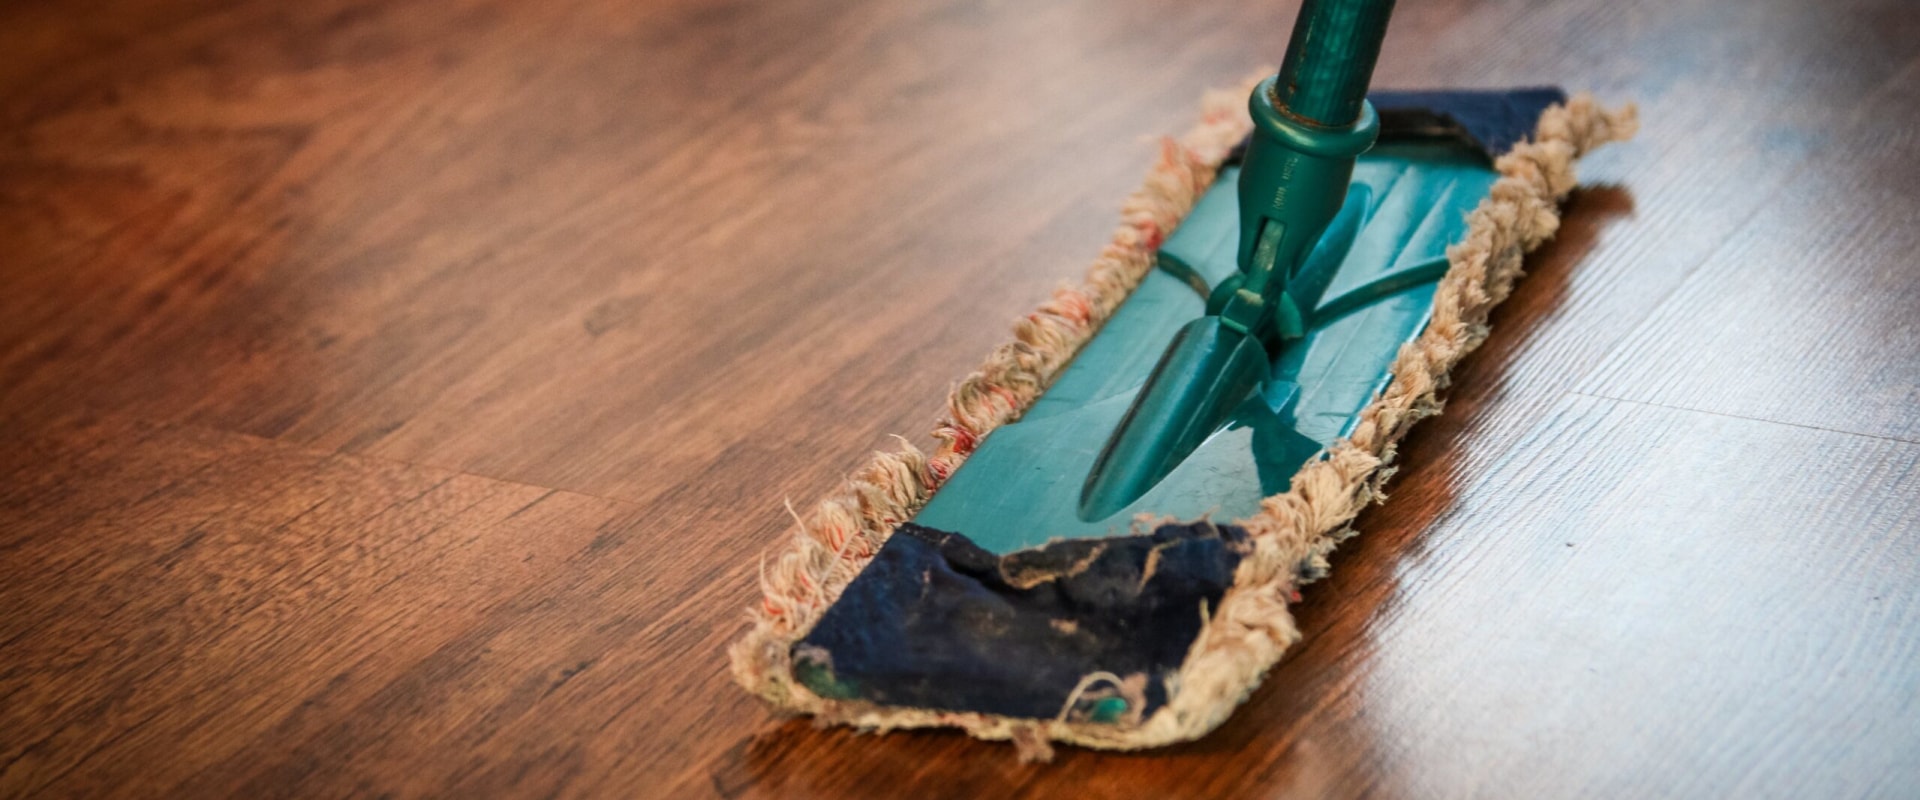 A Comprehensive Guide to Essential Oils for DIY Wood Floor Cleaners